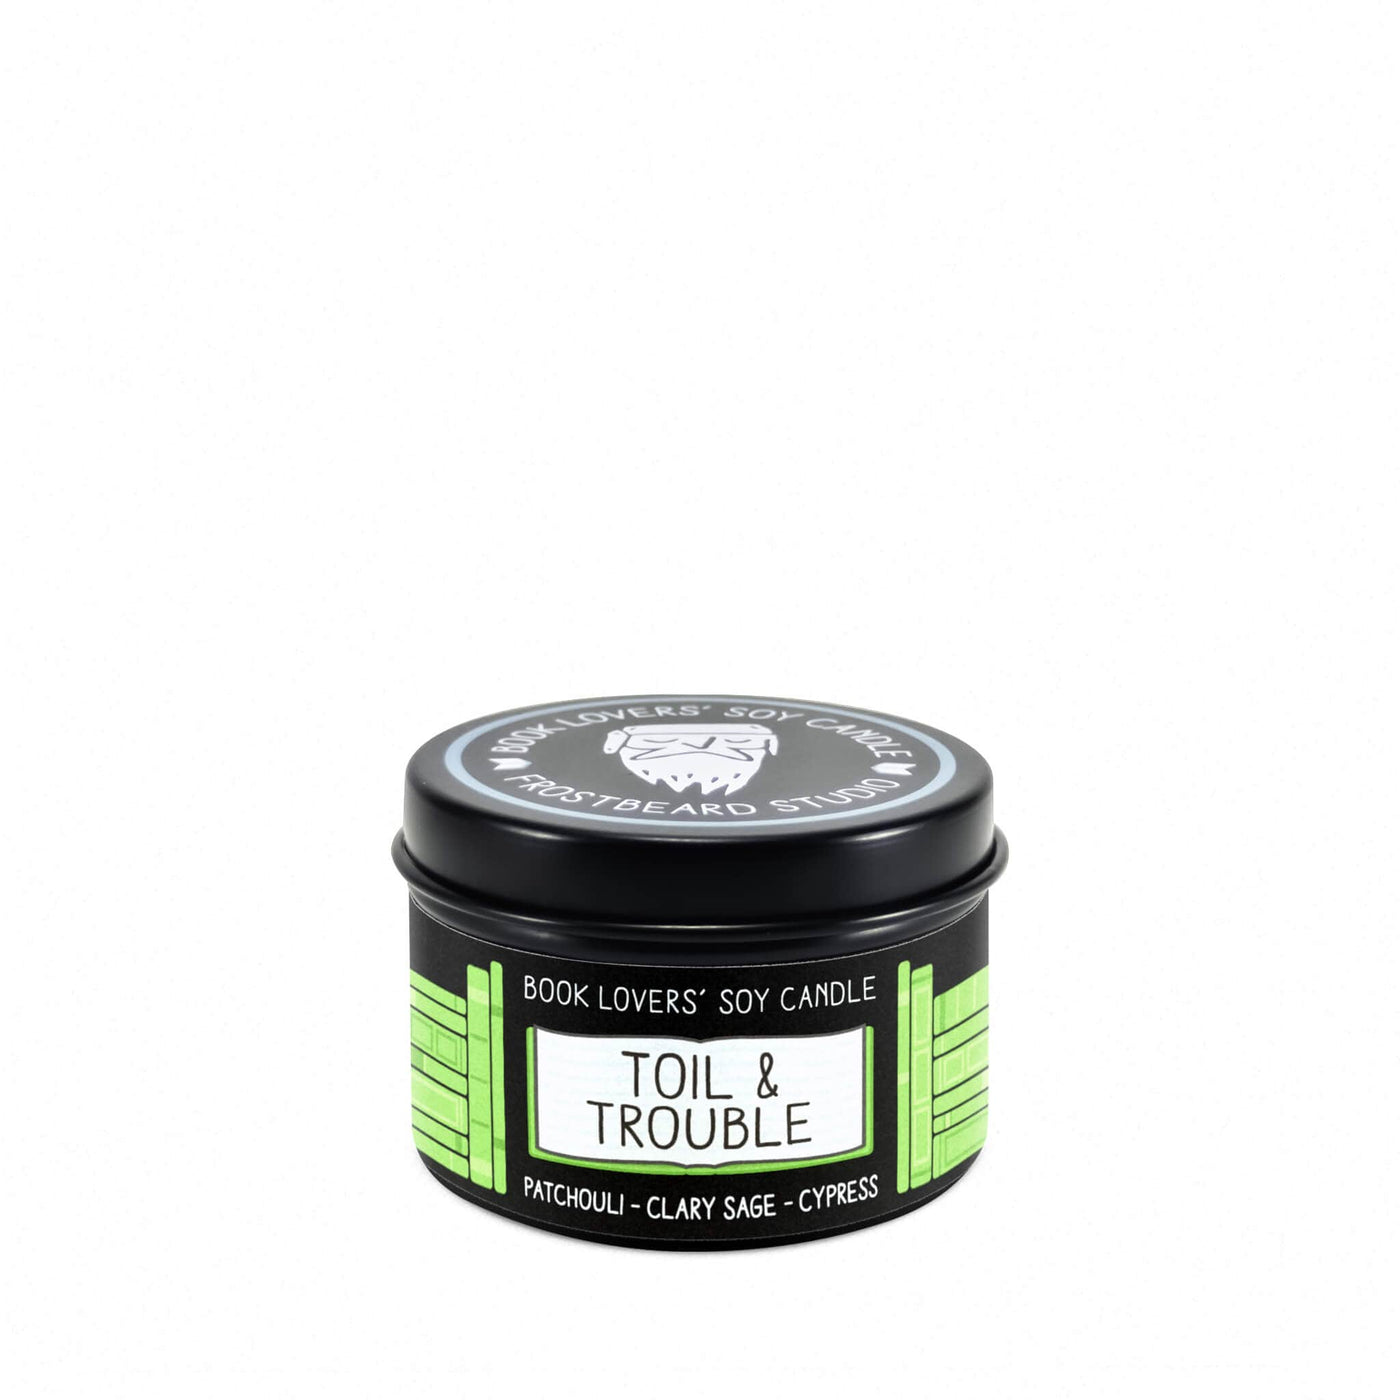 Toil & Trouble  -  2 oz Tin  -  Book Lovers' Soy Candle  -  Frostbeard Studio